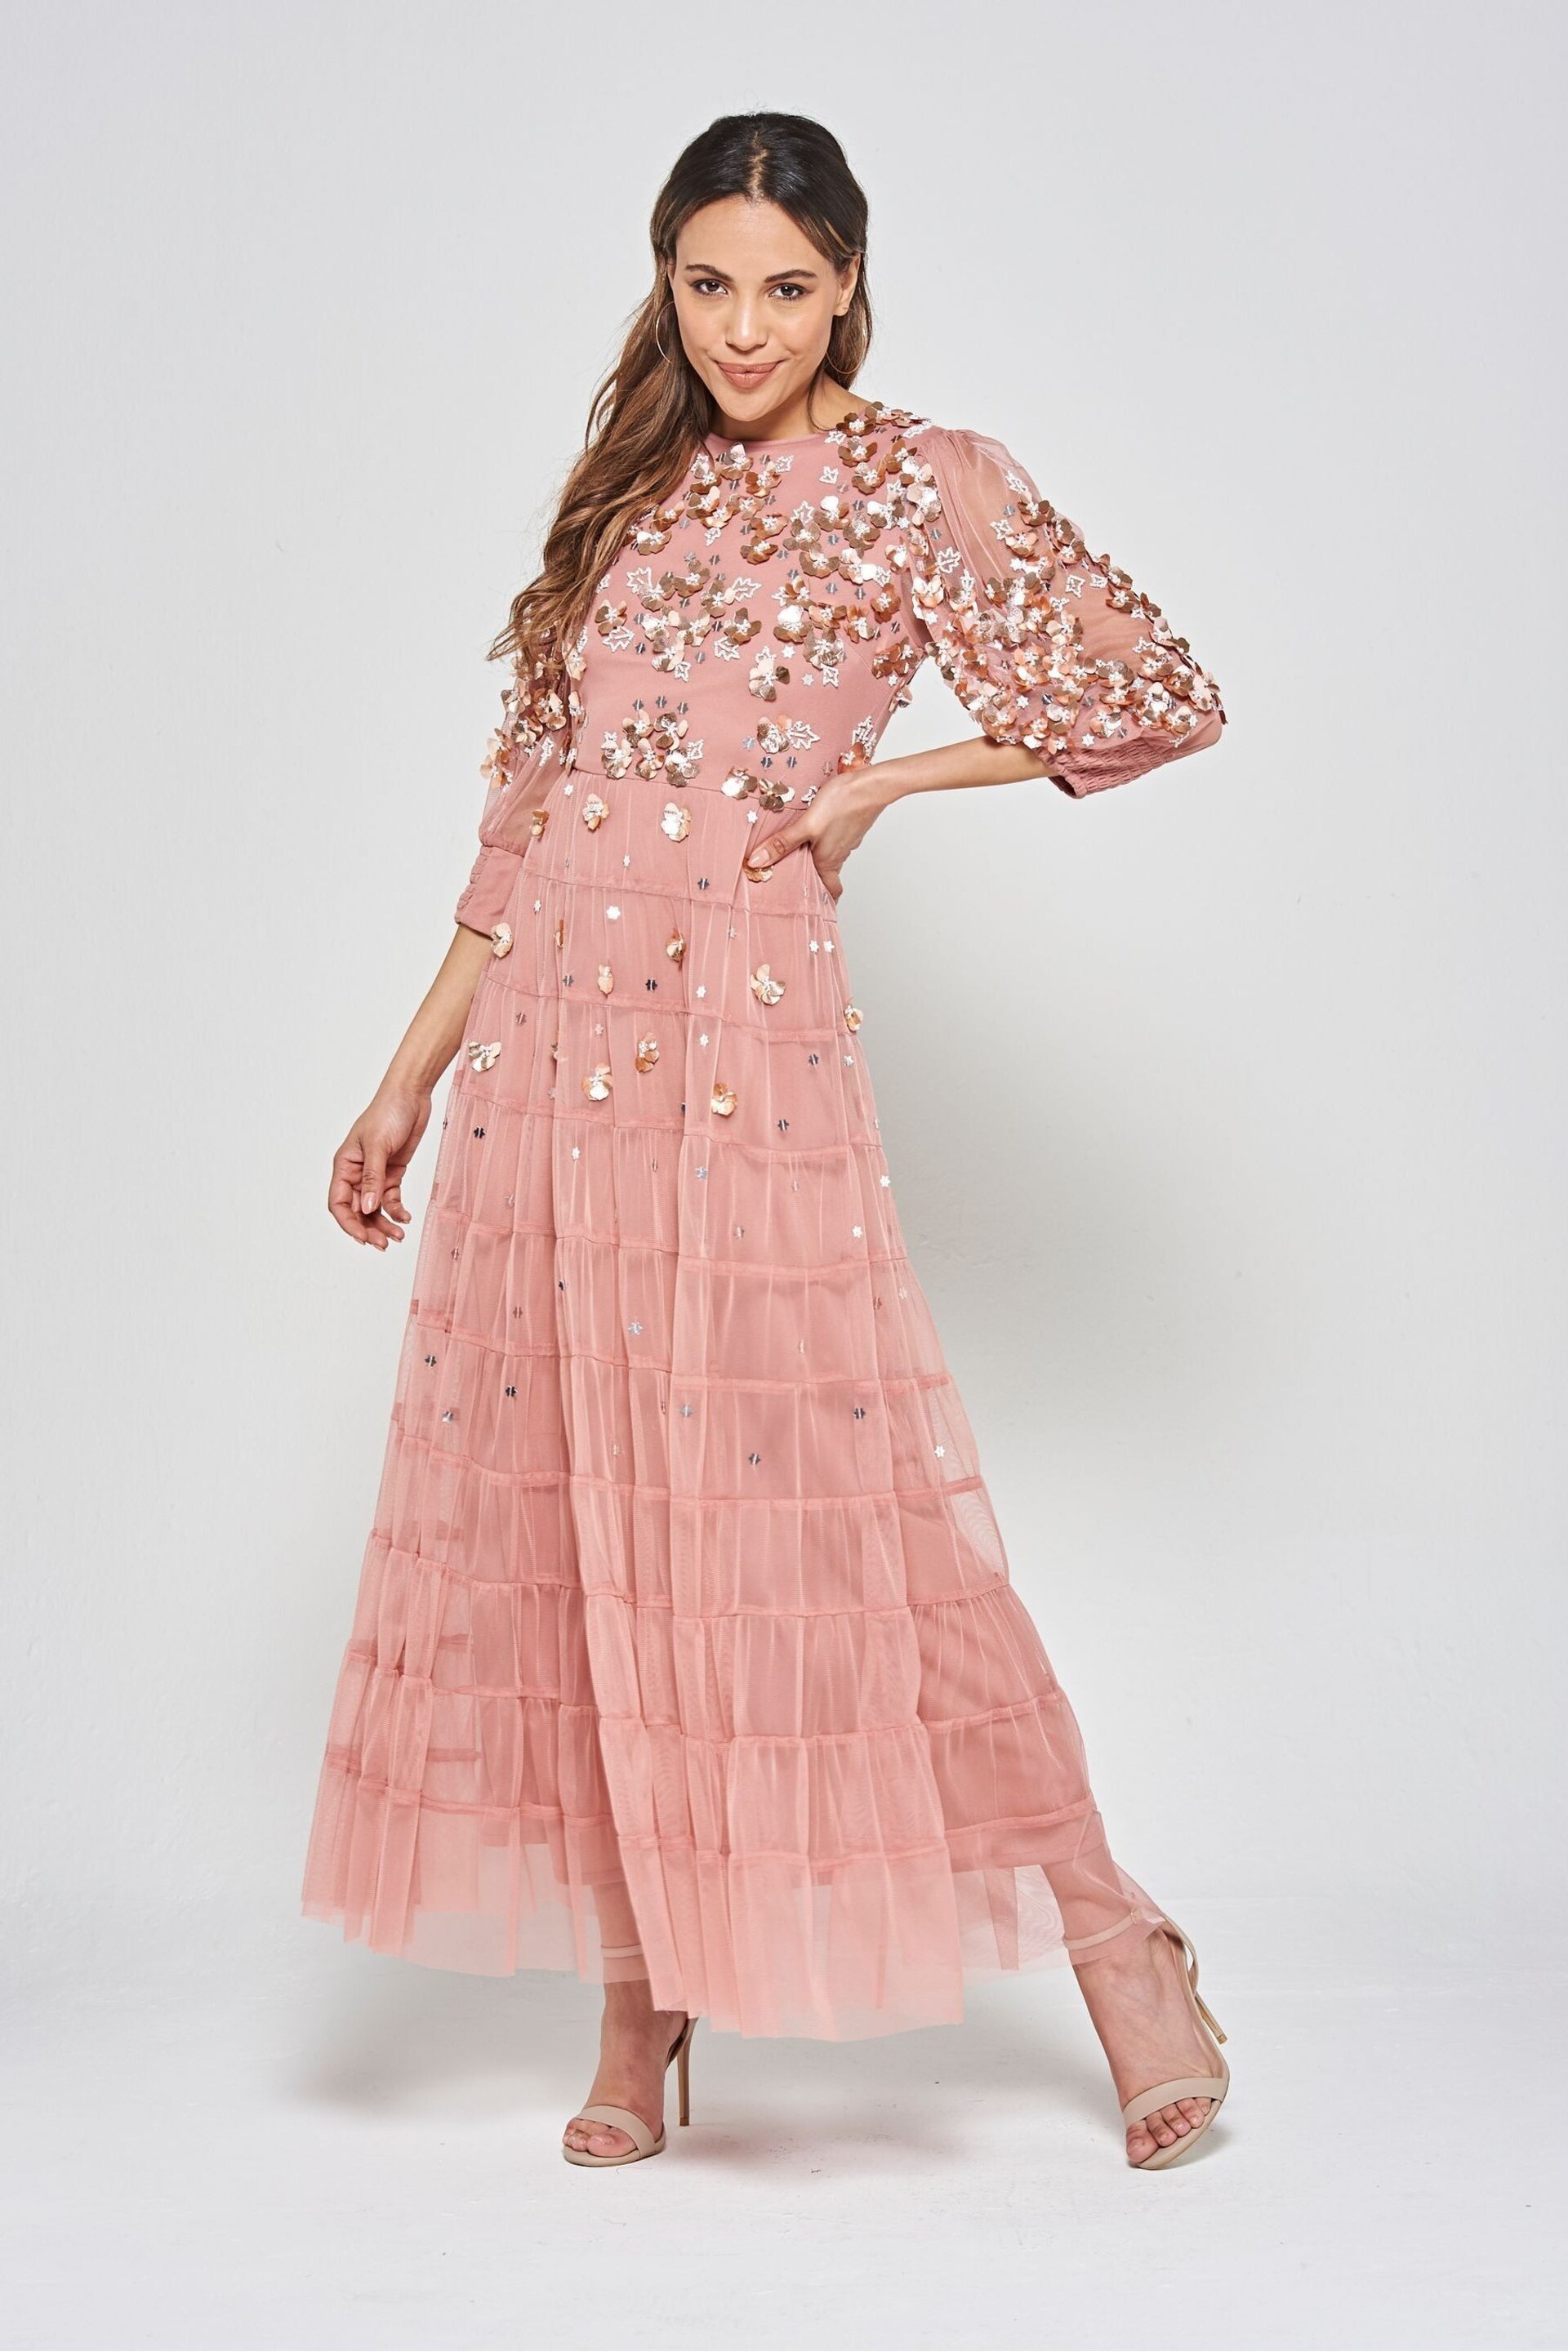 Frock and Frill Pink Embellished Maxi Dress - Image 1 of 4